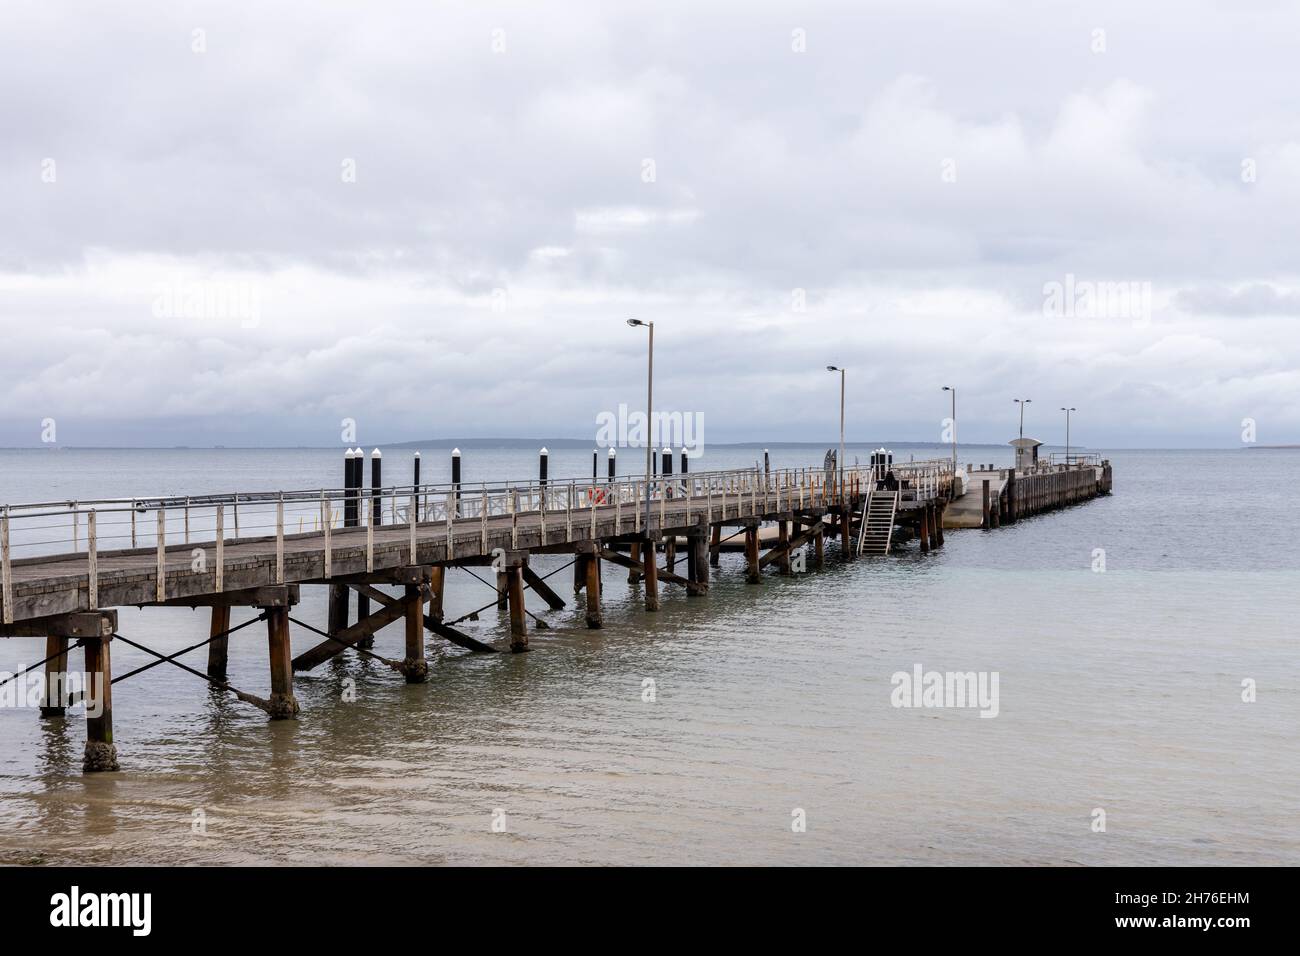 The town jetty located in Port Lincoln South Australia on November 19th 2021 Stock Photo